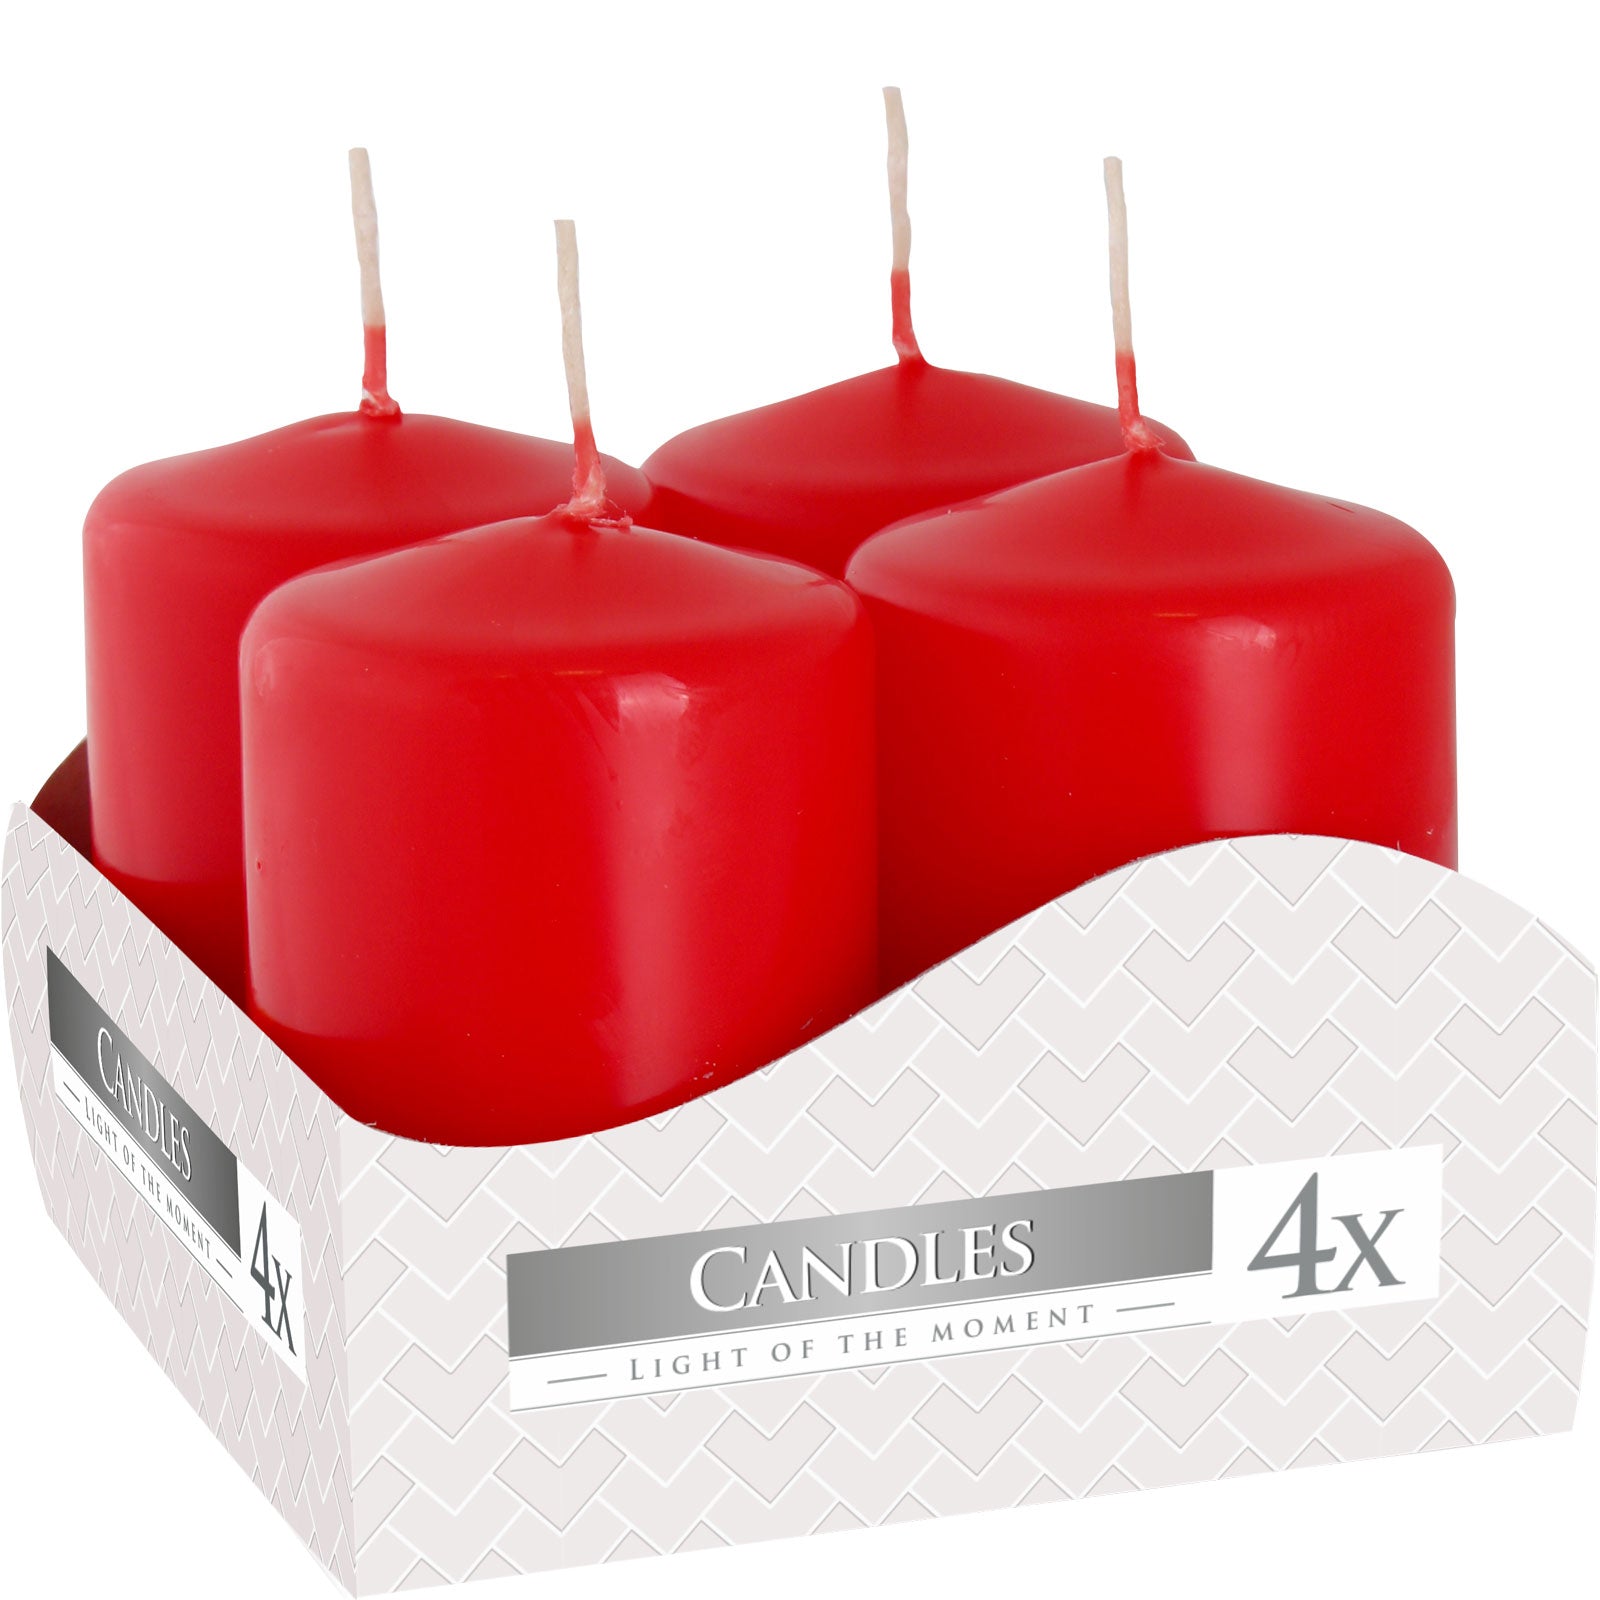 View Set of 4 Pillar Candles 40x60mm Red information